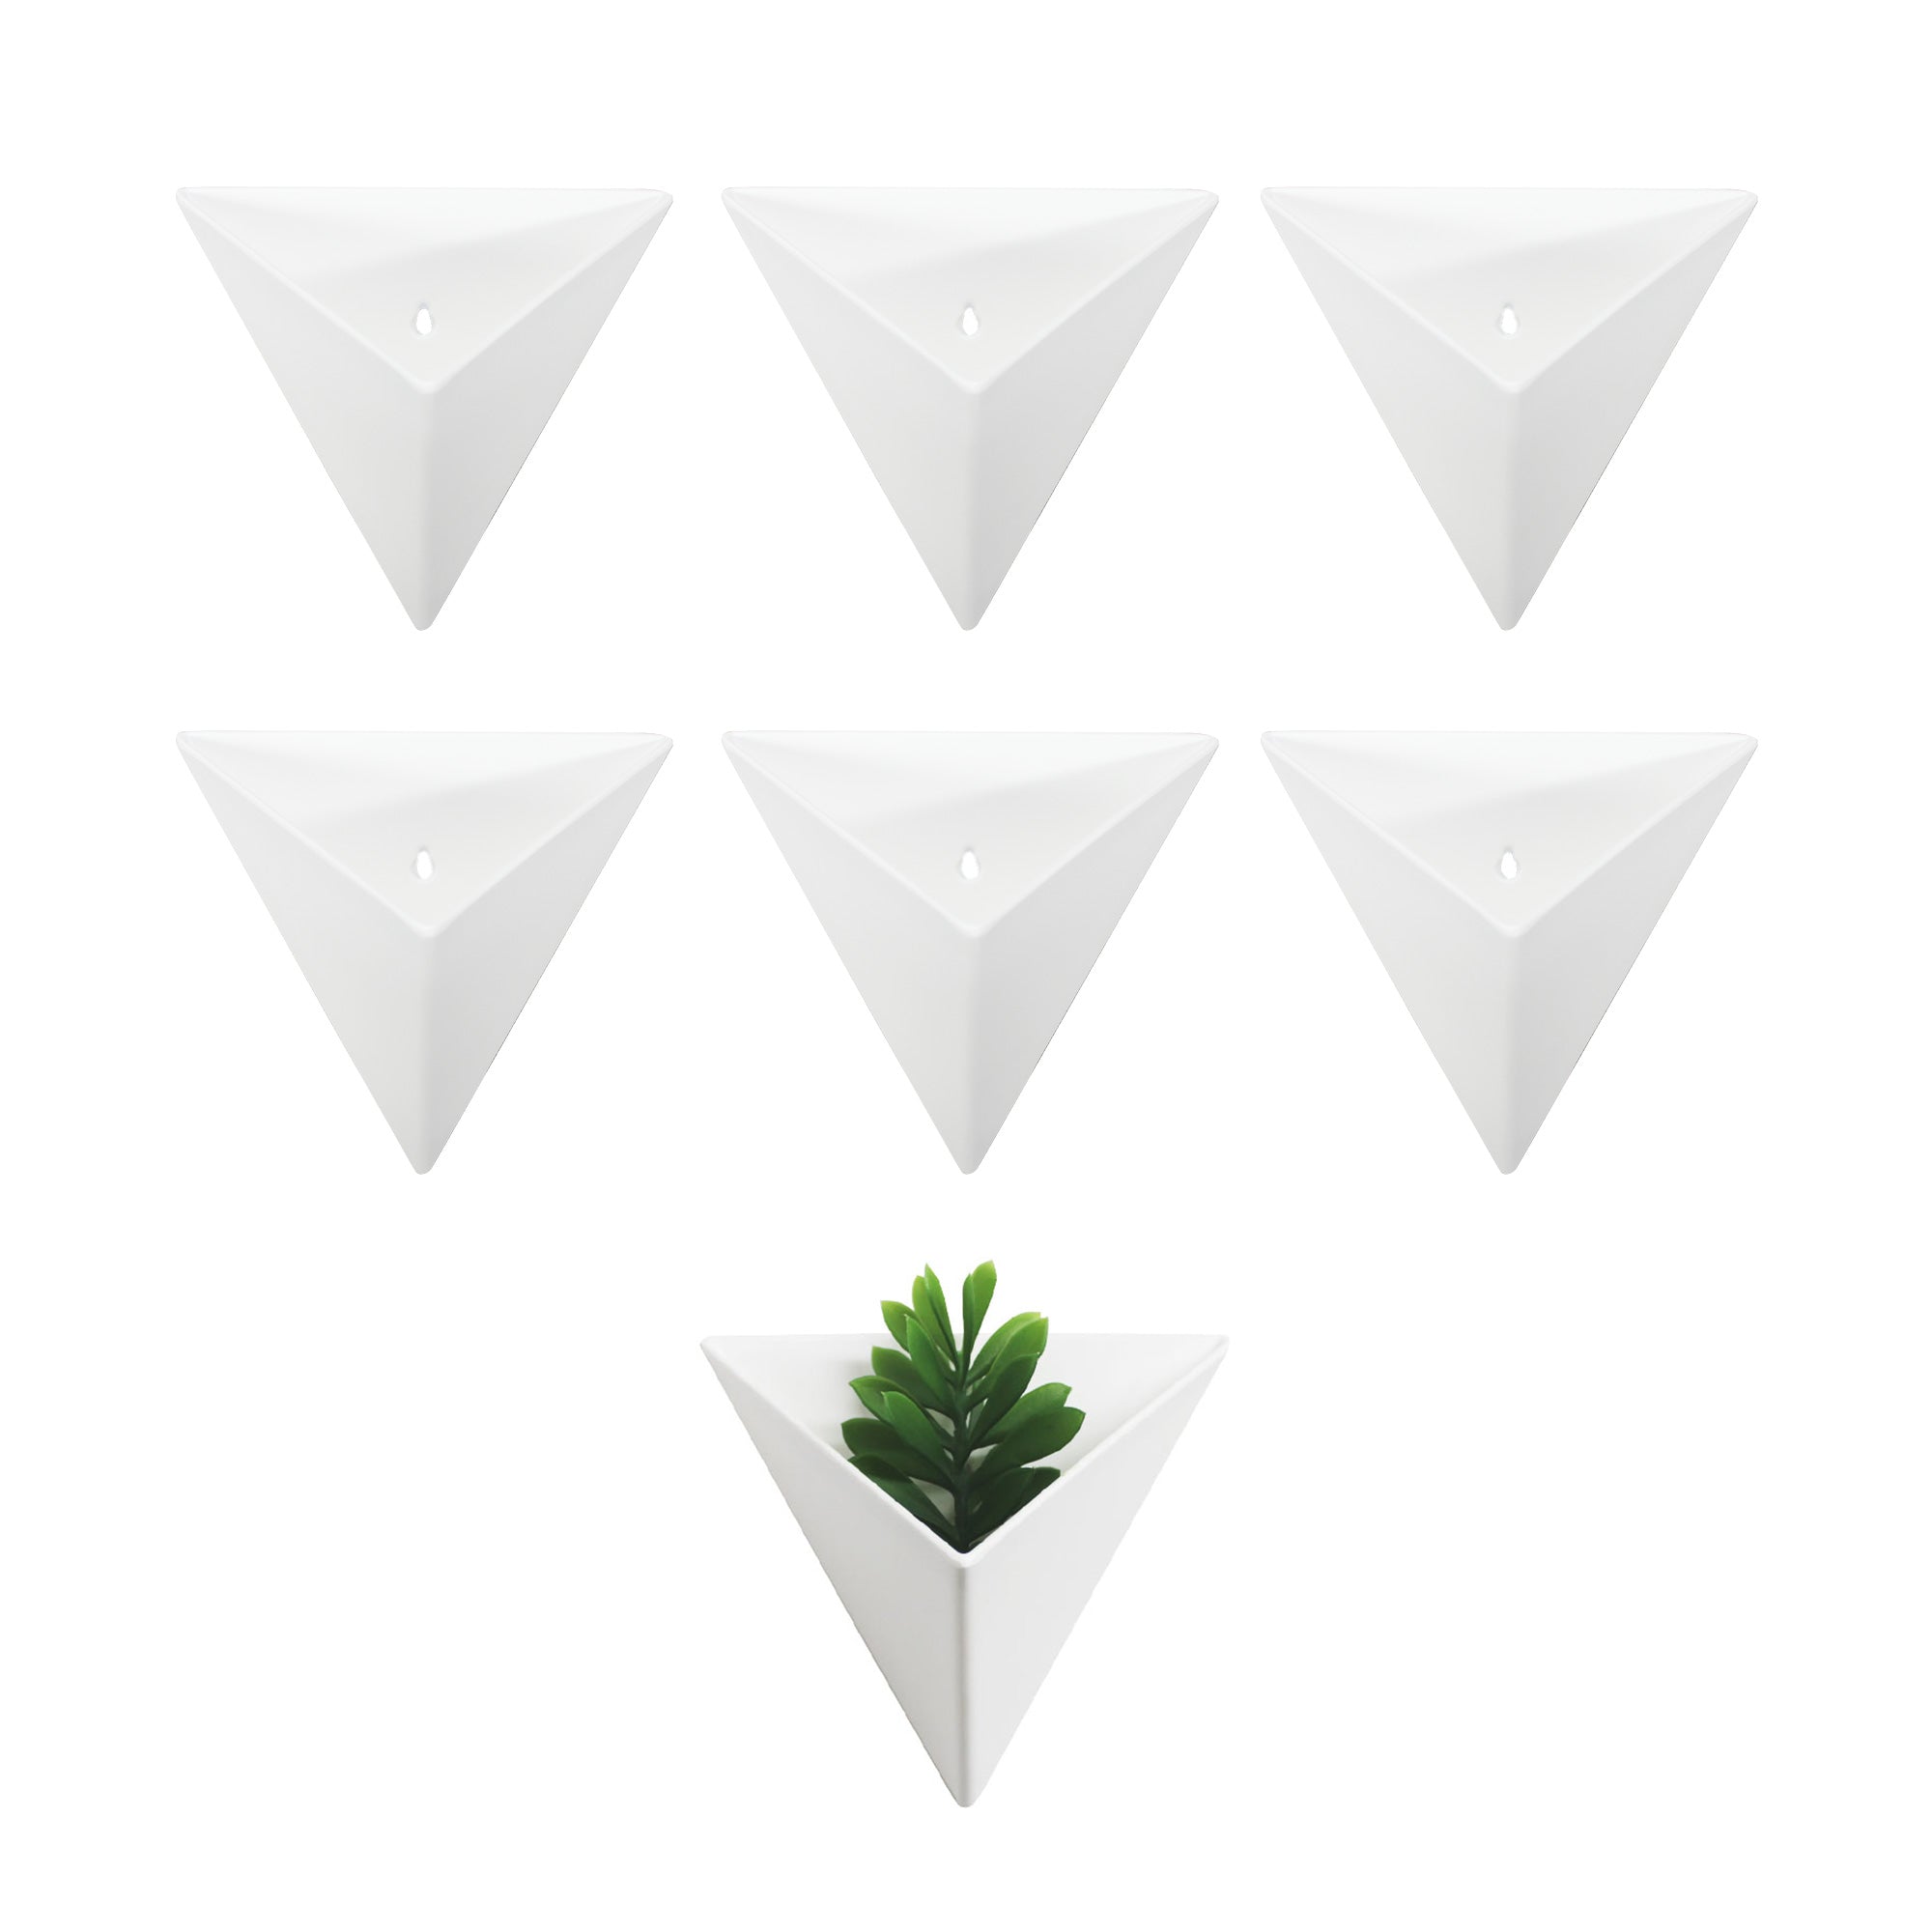 Qssky Set of 7 Wall Planter Imitation Ceramic Geometric Hanging Vases for Indoor and Outdoor Live or Faux Plants, Great Idea for Decor Your Own Modern Vertical Plant Wall Set of 7